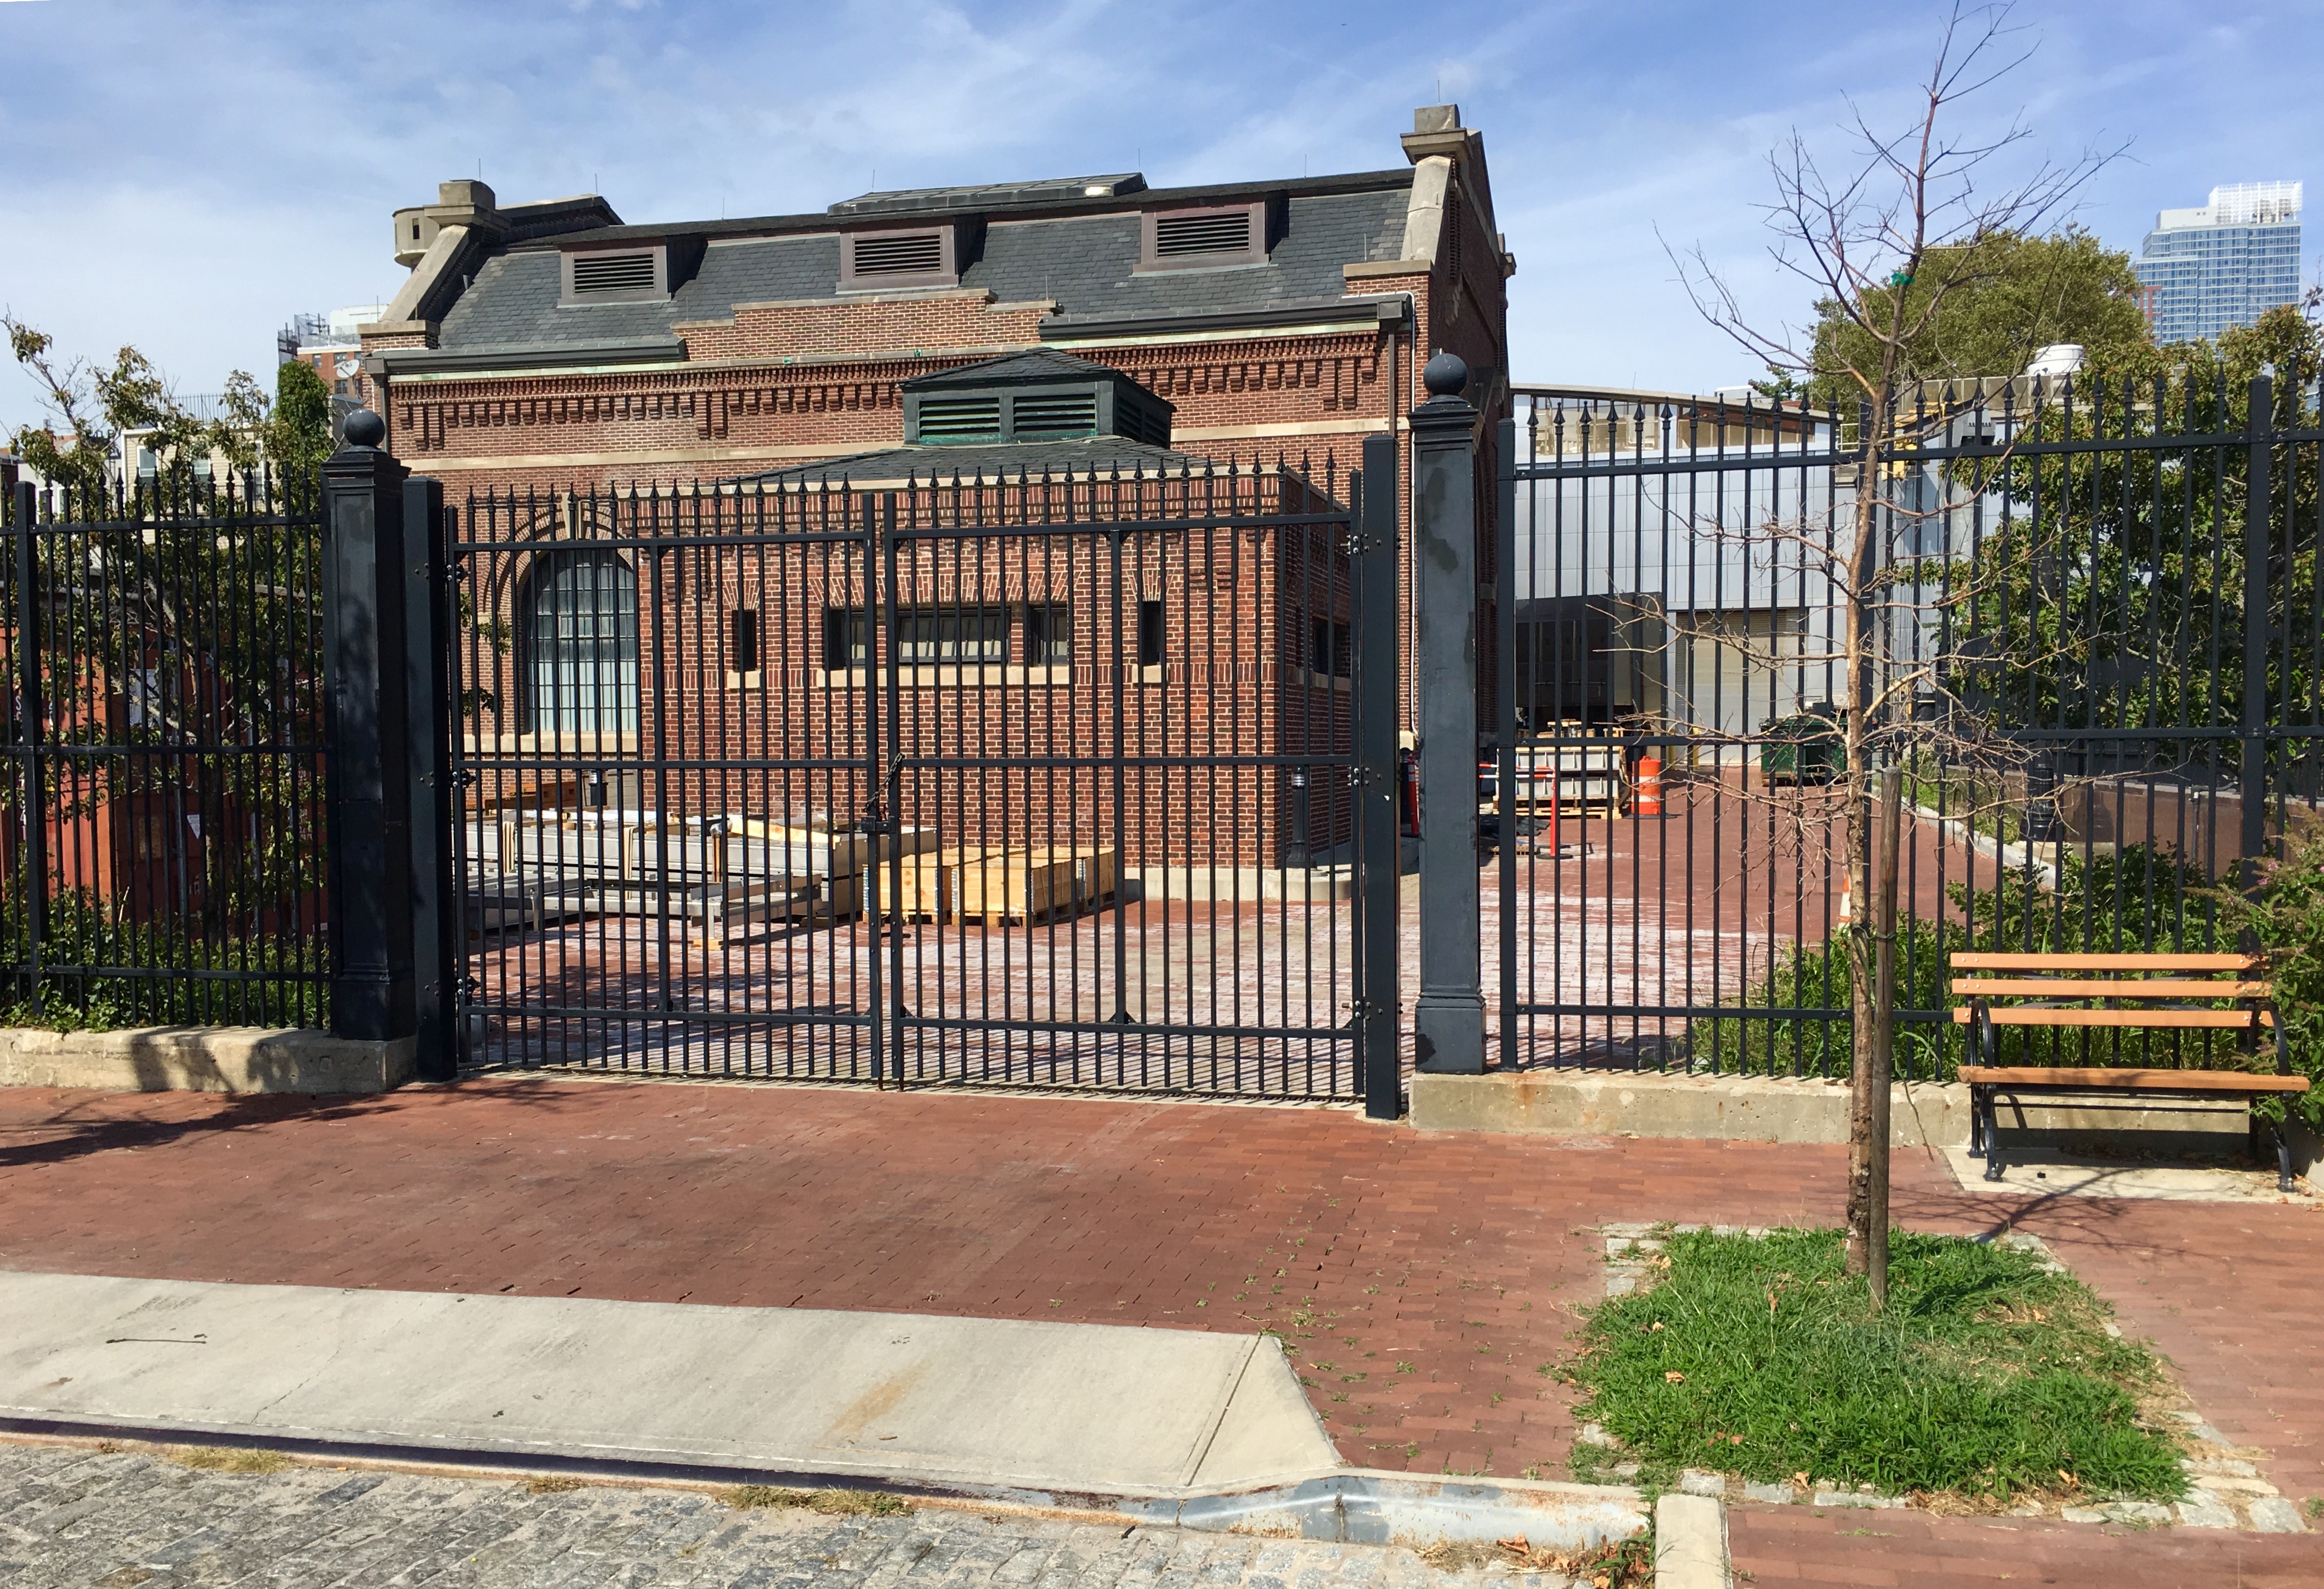 The brick Gowanus Pumping Station buildings are being considered for landmarking but other structures on the property are not. Eagle photo by Lore Croghan